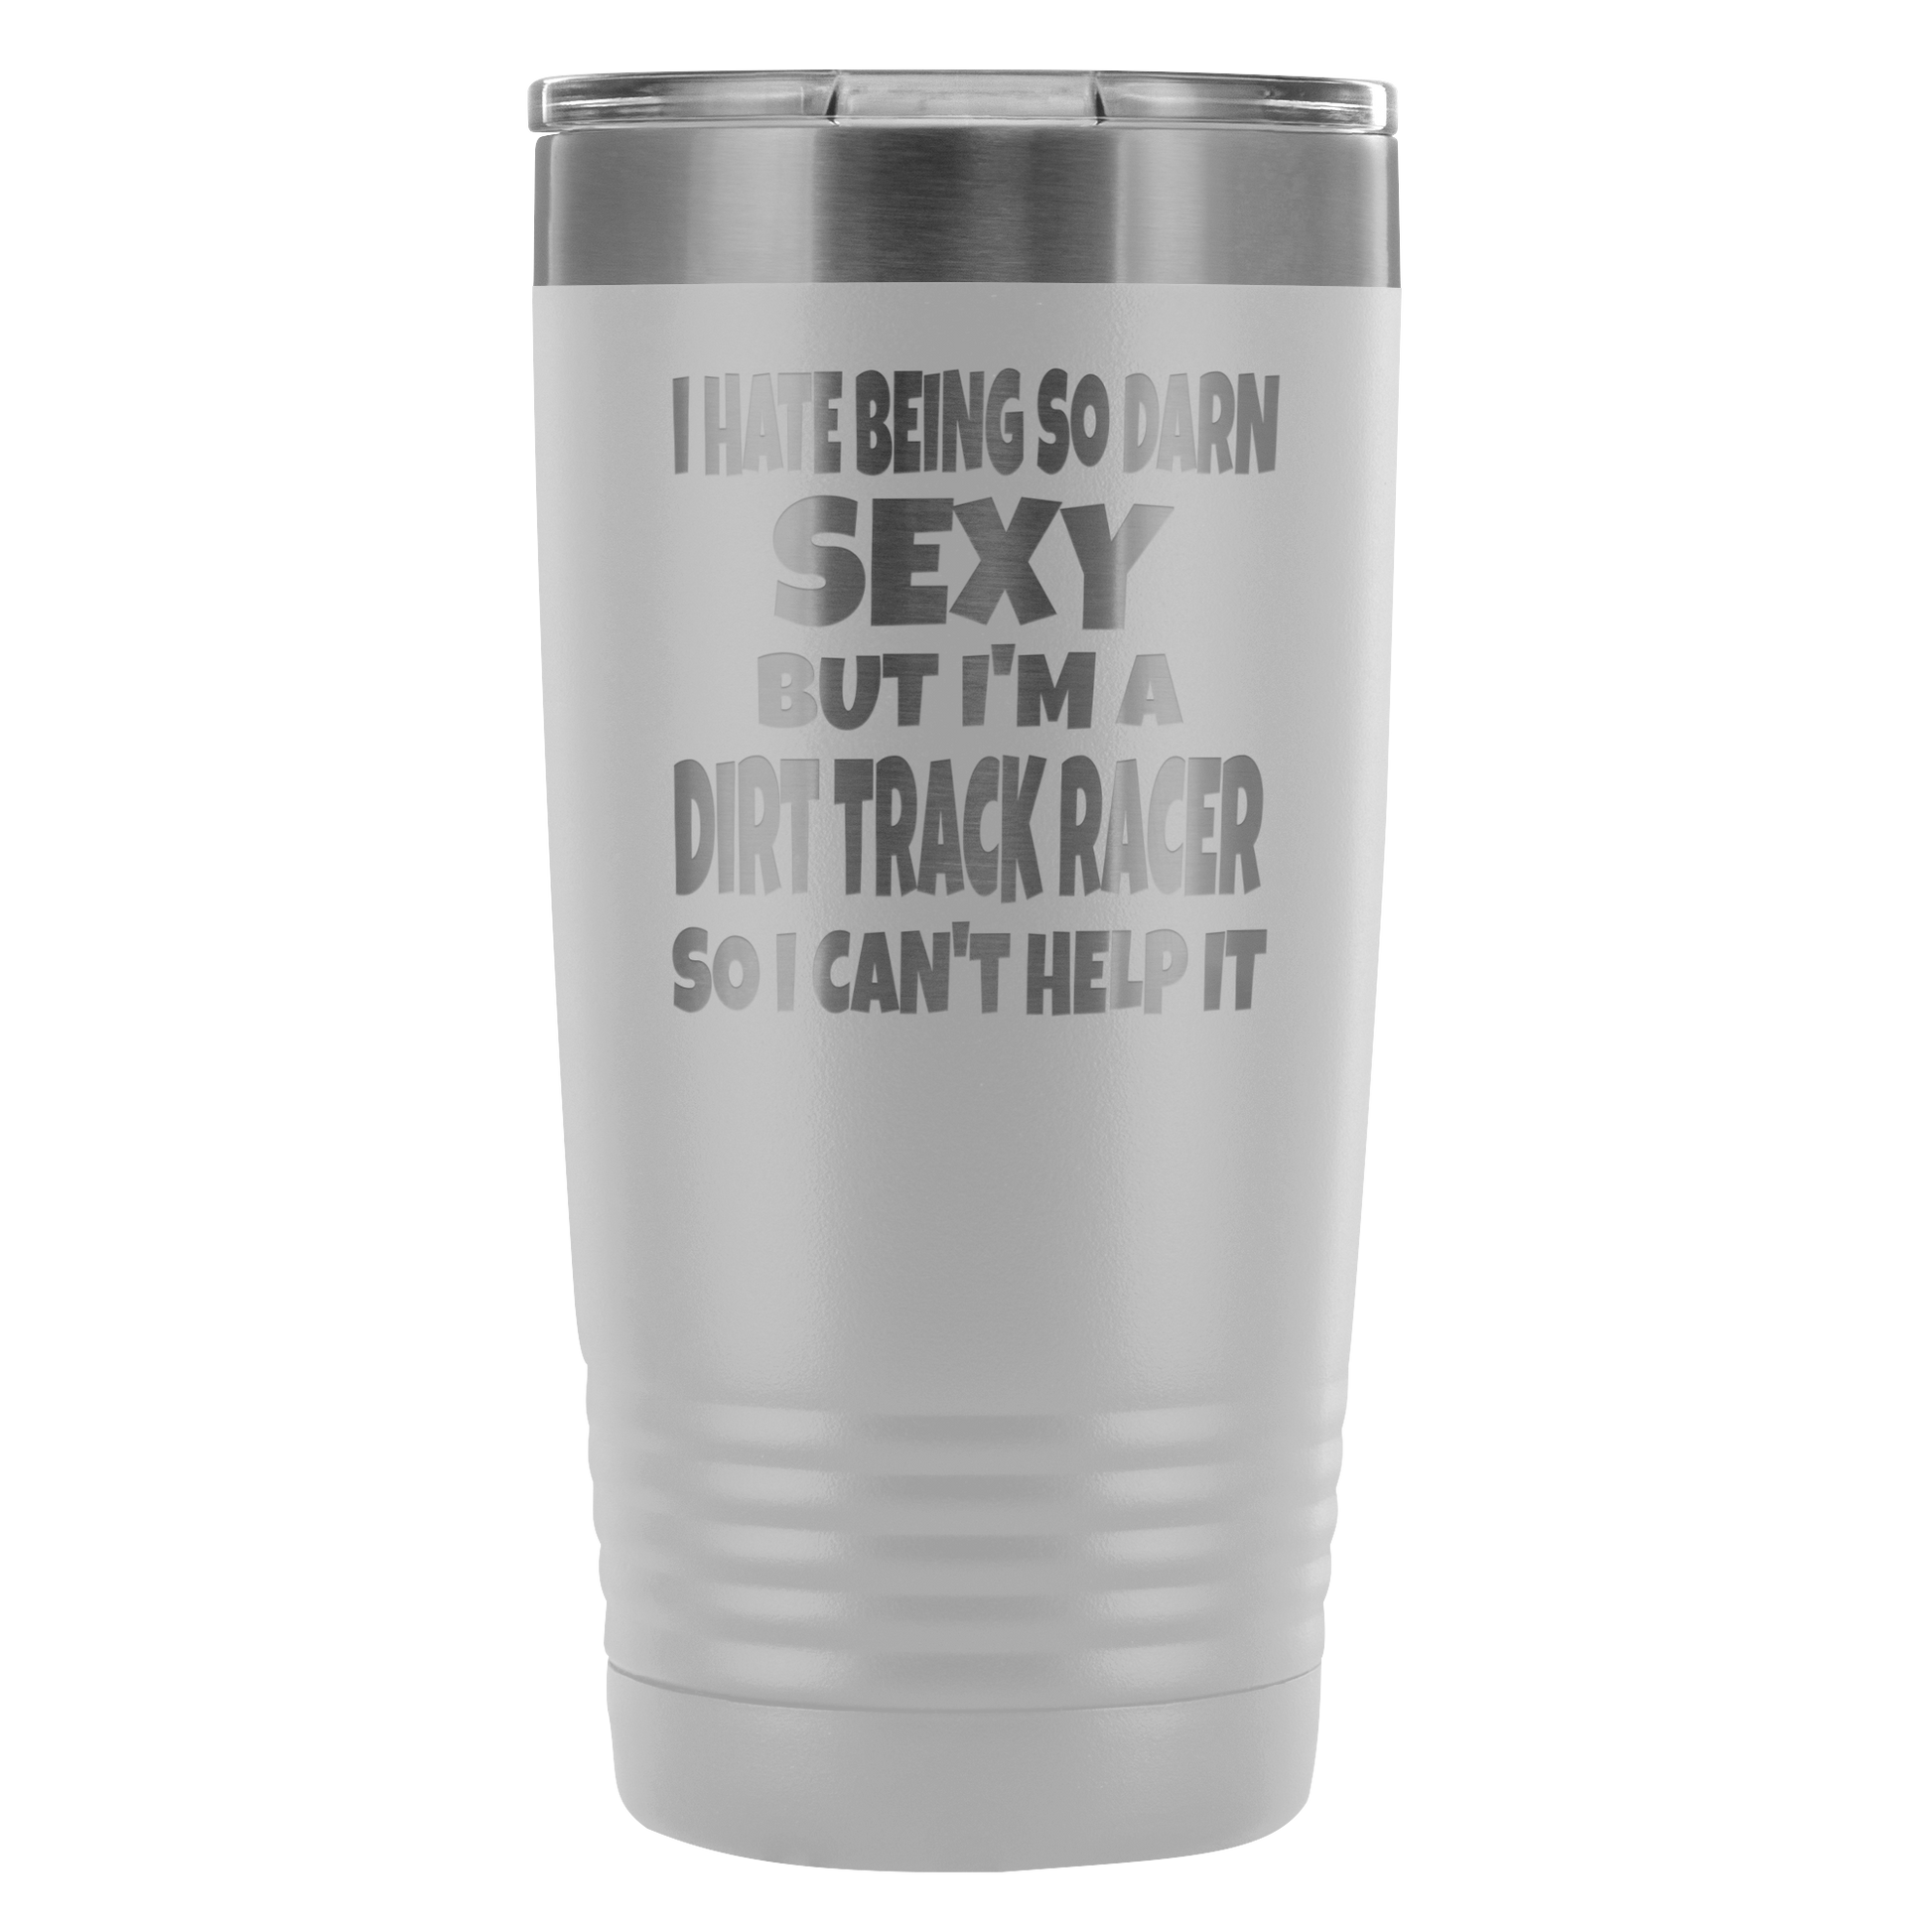 Hate Being Sexy But I'm A Dirt Track Racer  20 Oz Travel Tumbler - Turn Left T-Shirts Racewear